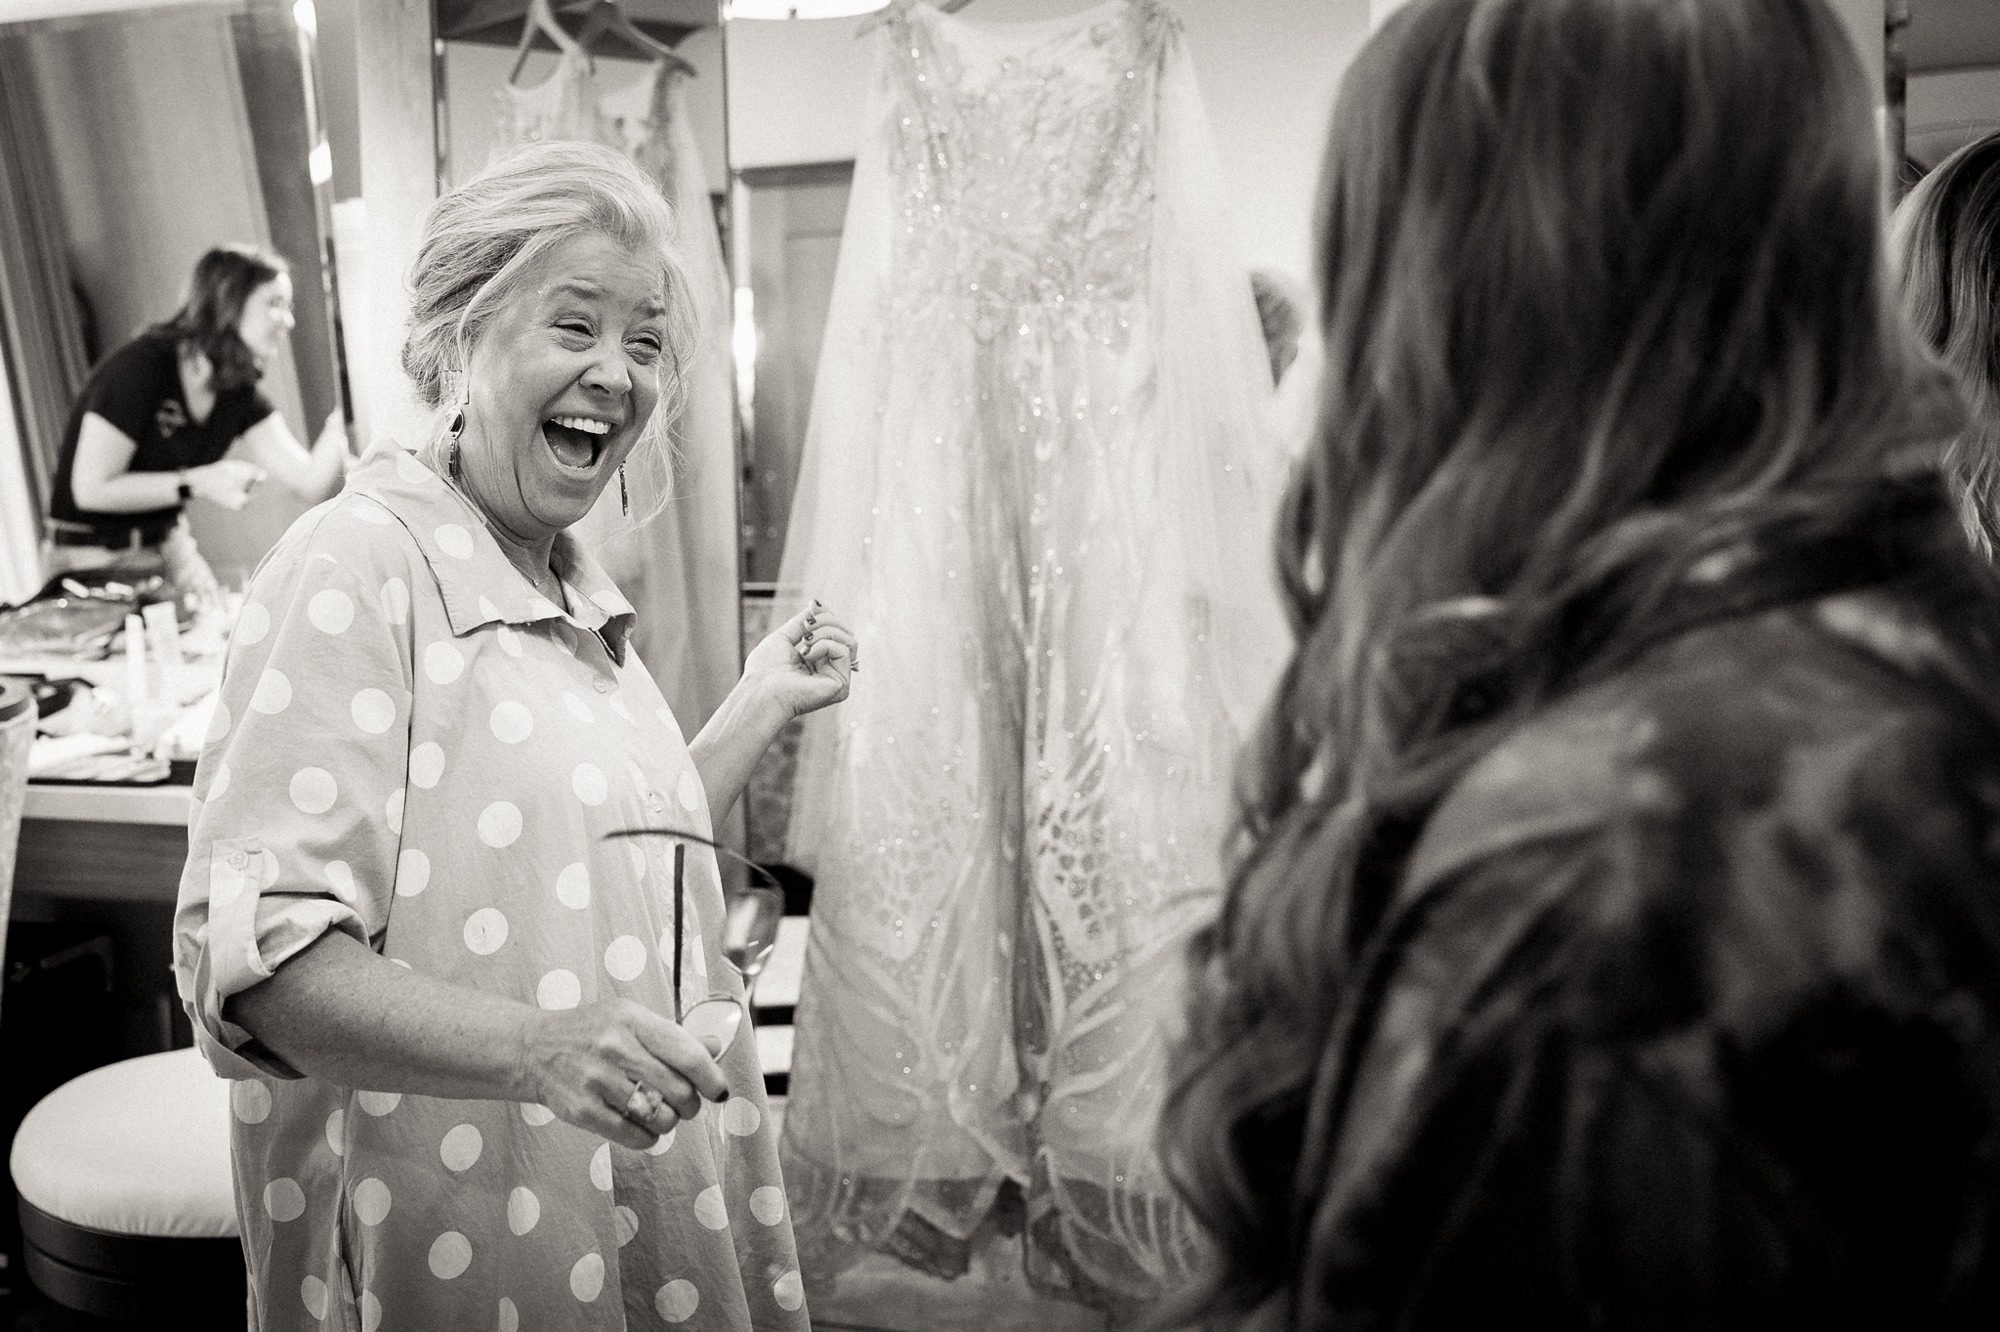 woman excited about wedding dress